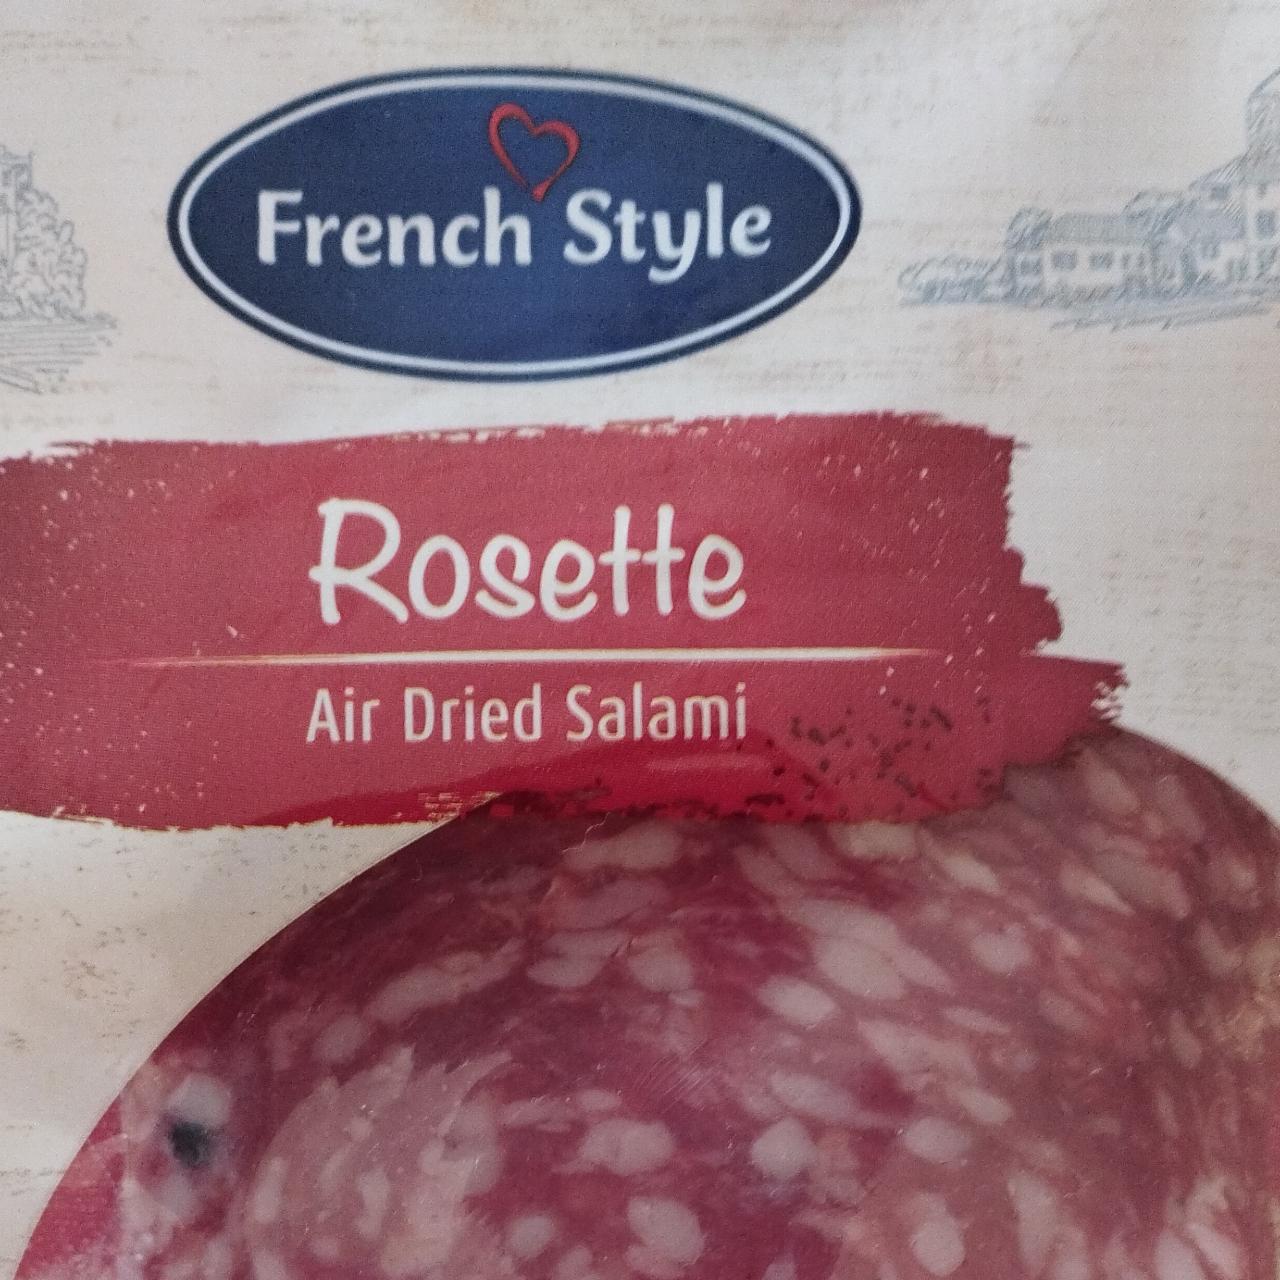 Képek - Rosette Air Dried Salami French style